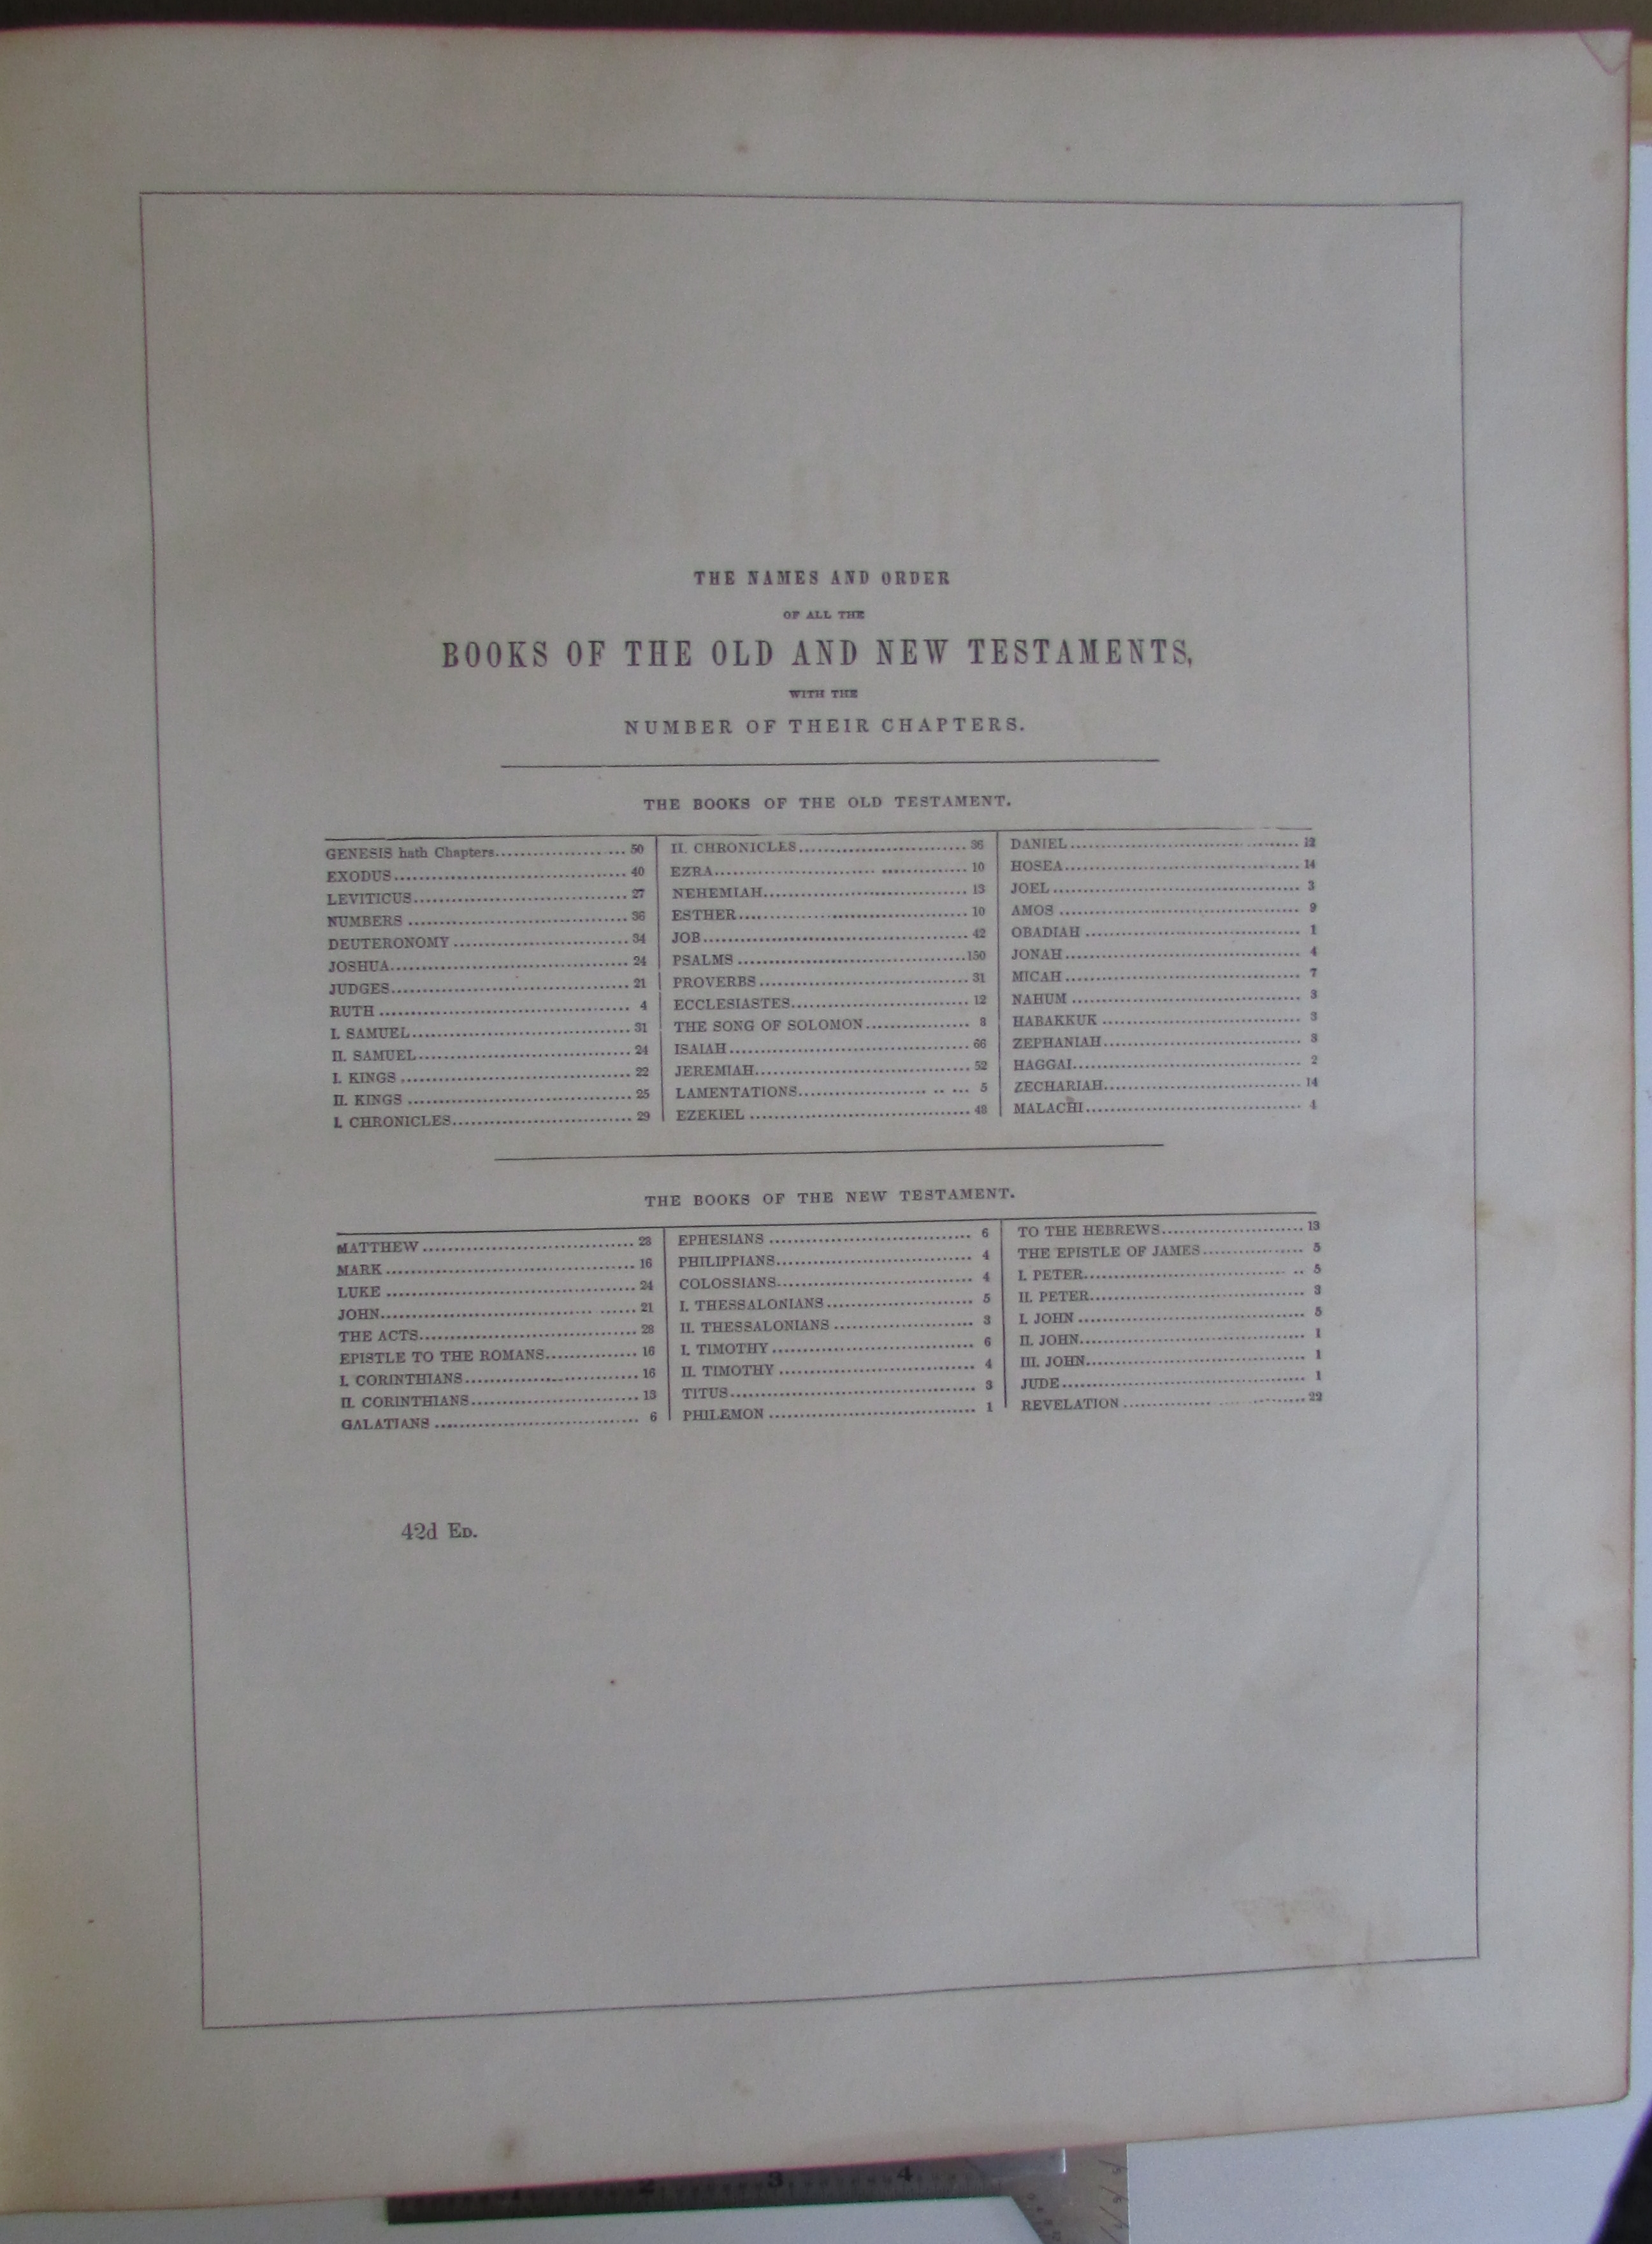 Inside of Title Page - List of the books